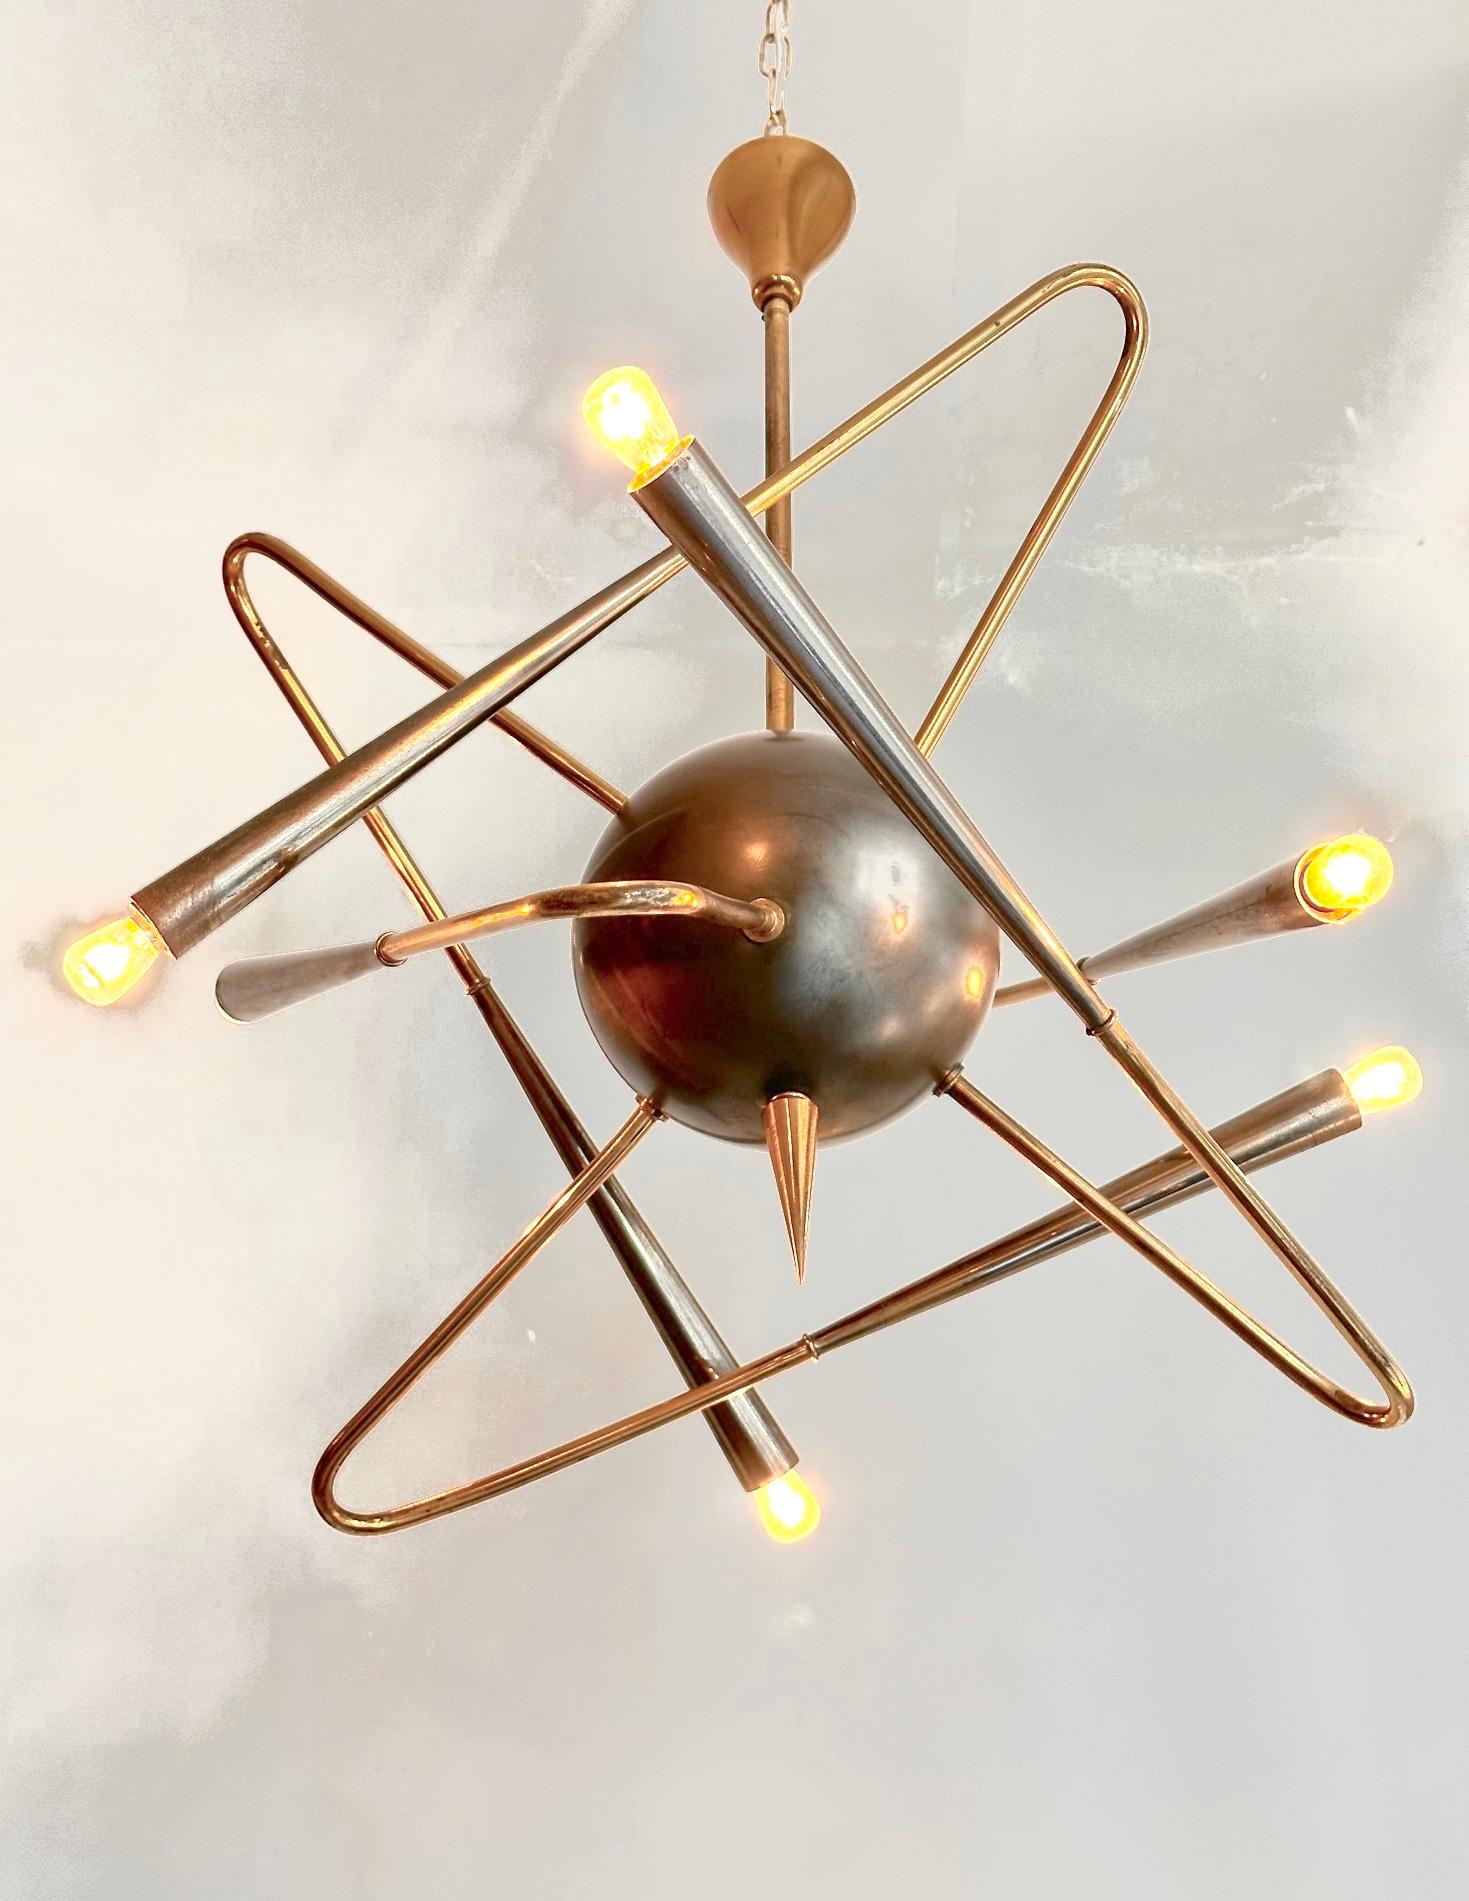 An original Stilnovo chandelier/pendant,Edited in Italy in 1950.
Original lighting feature including    six brass arms and a central medallion connected to a rigid brassro.Exquisite design.evoking a satellite shape.
Professional packing  and